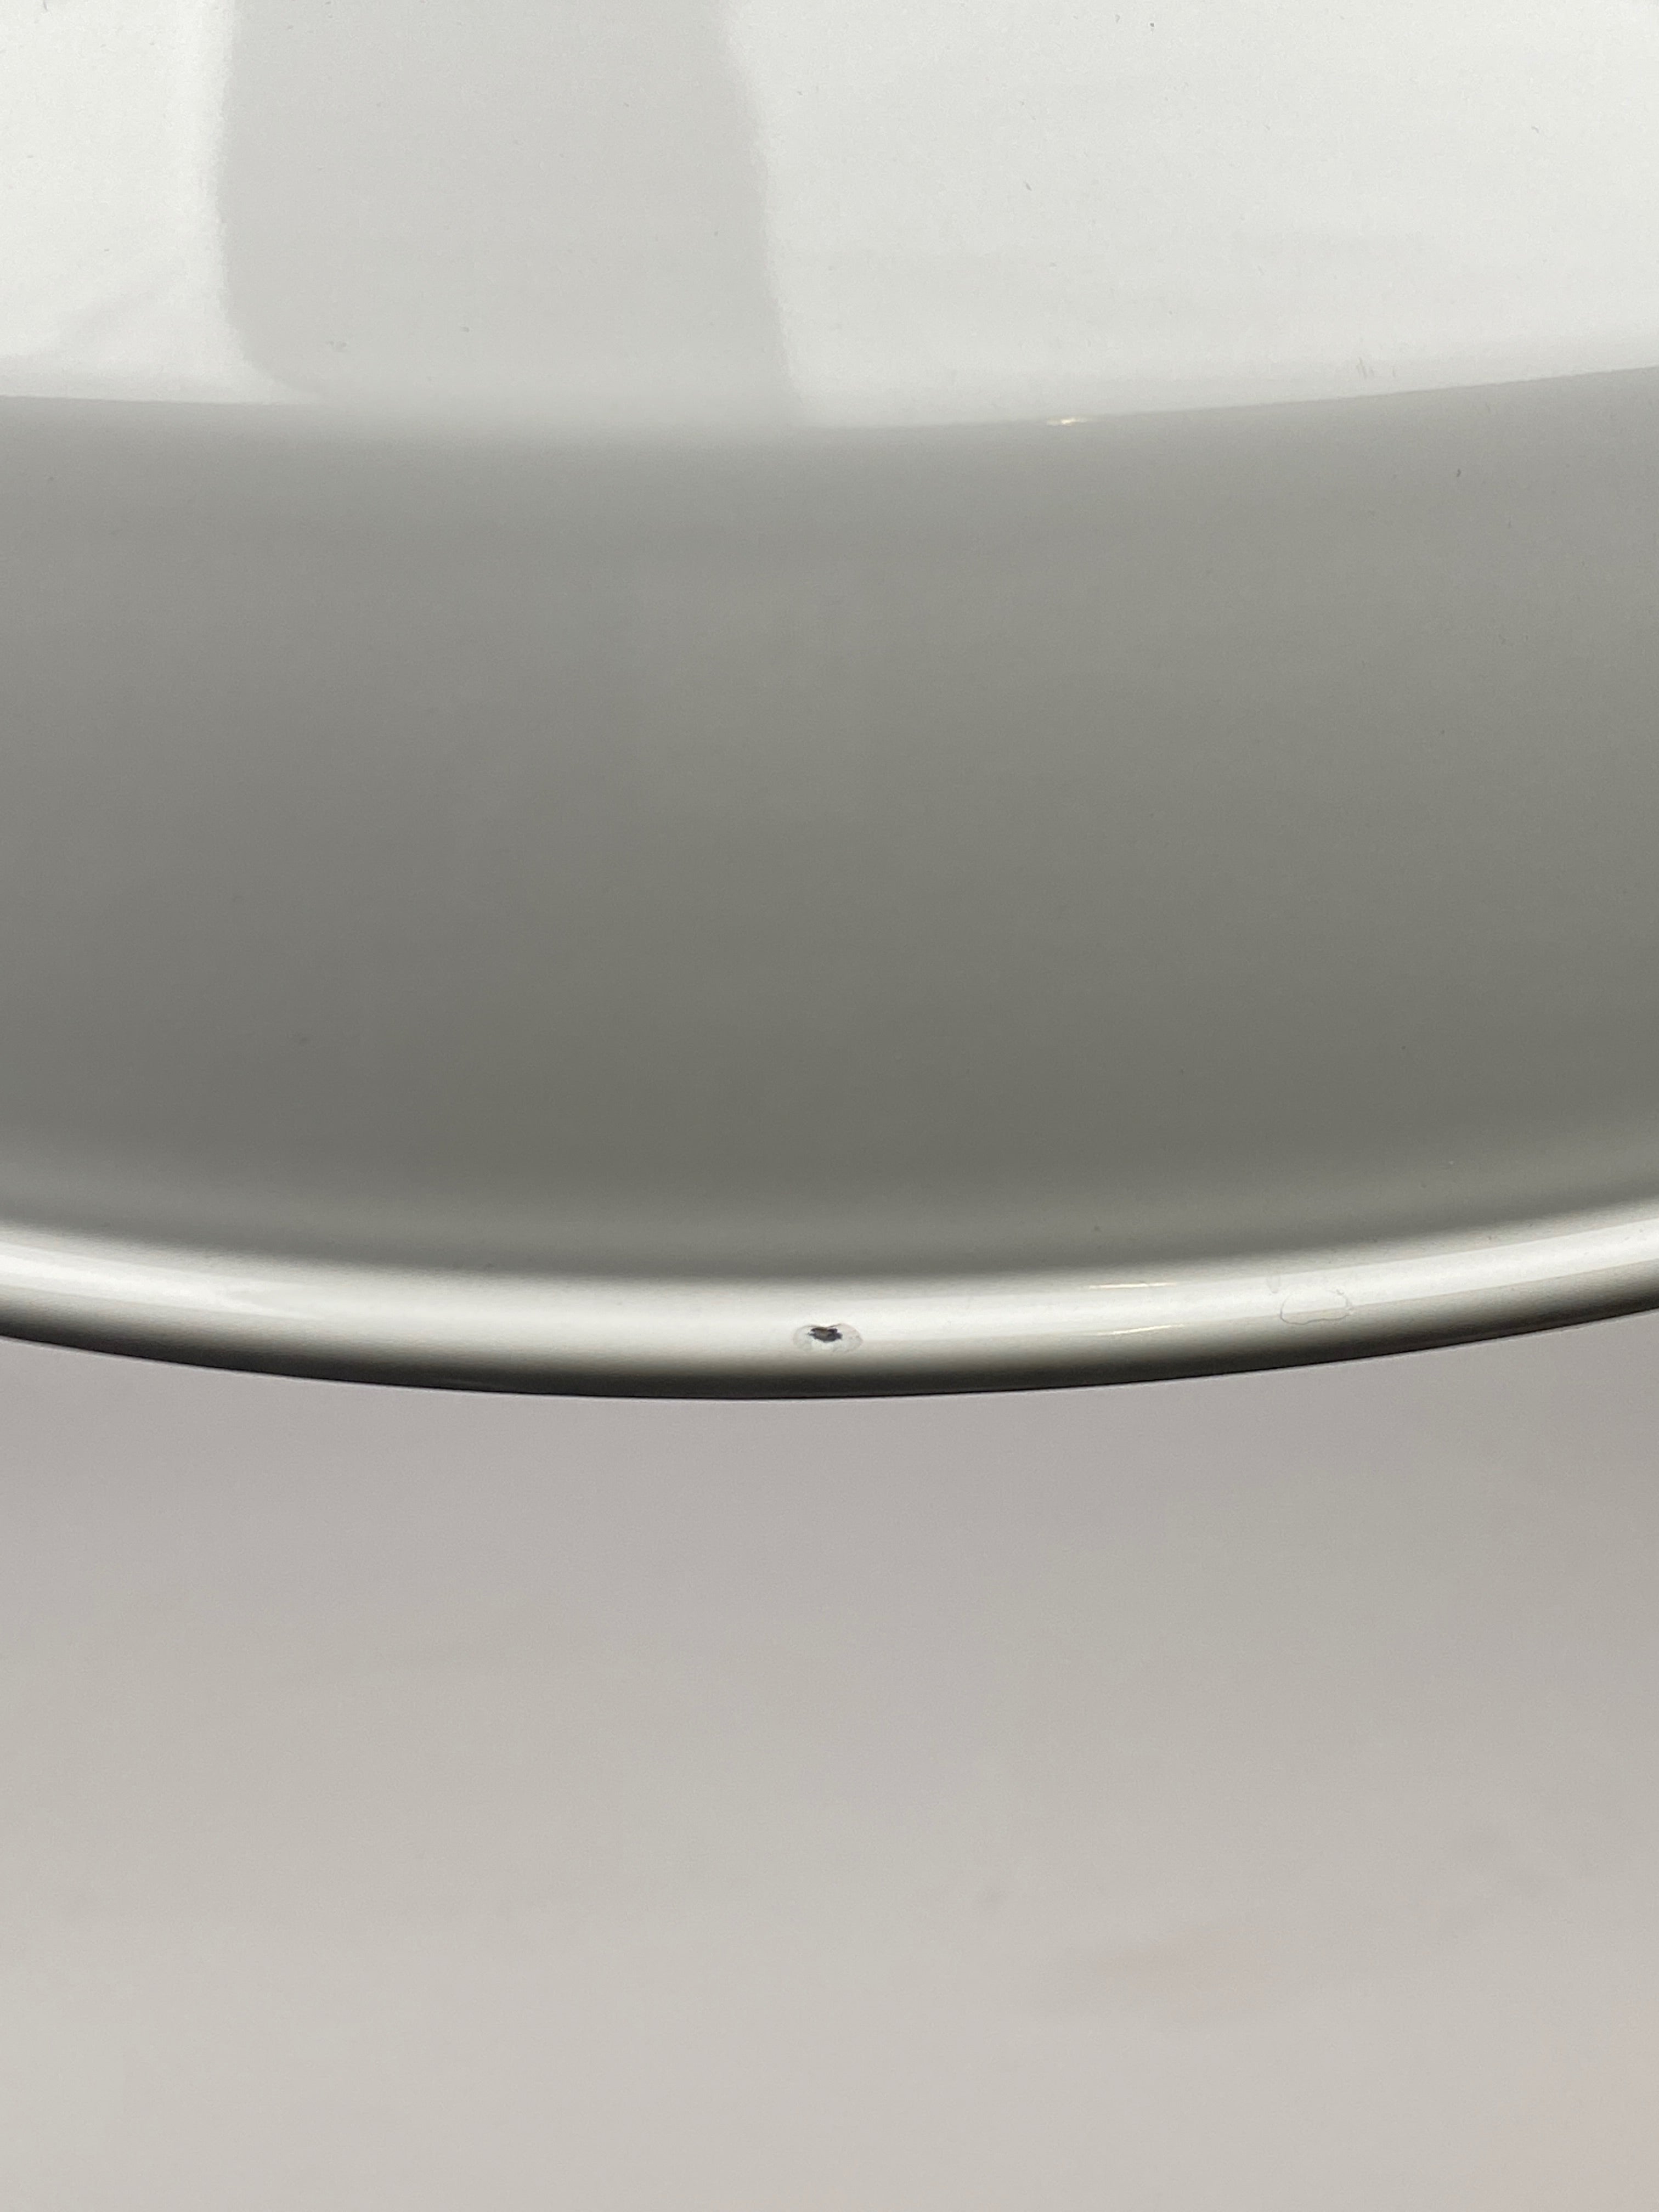 Example of Grade B damage that may be visible on a Worn Lighting Shade. Image shows minor chips to the rim of a white shade.